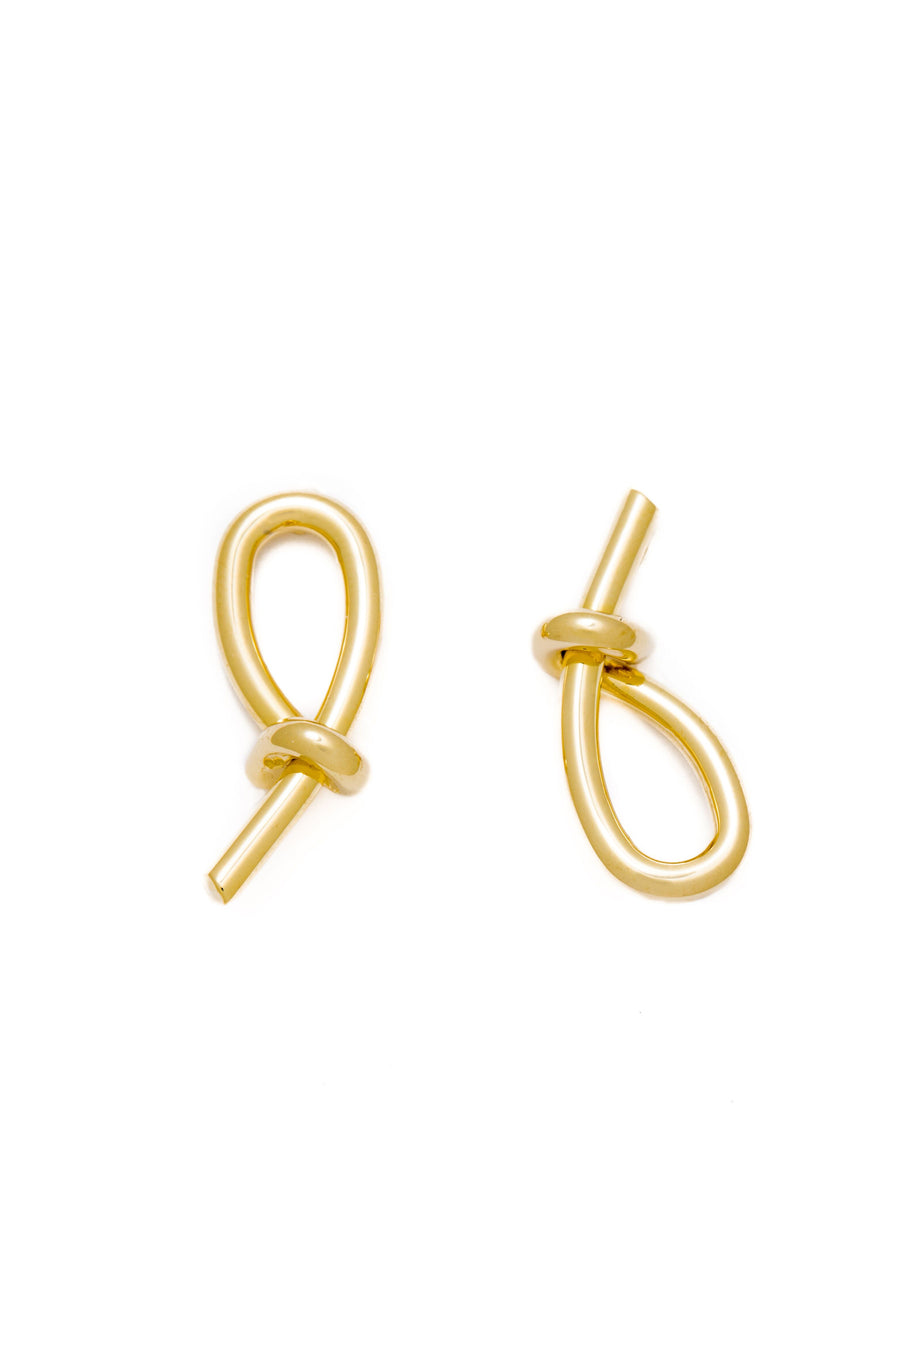 Knotted Gold Earrings - Ella